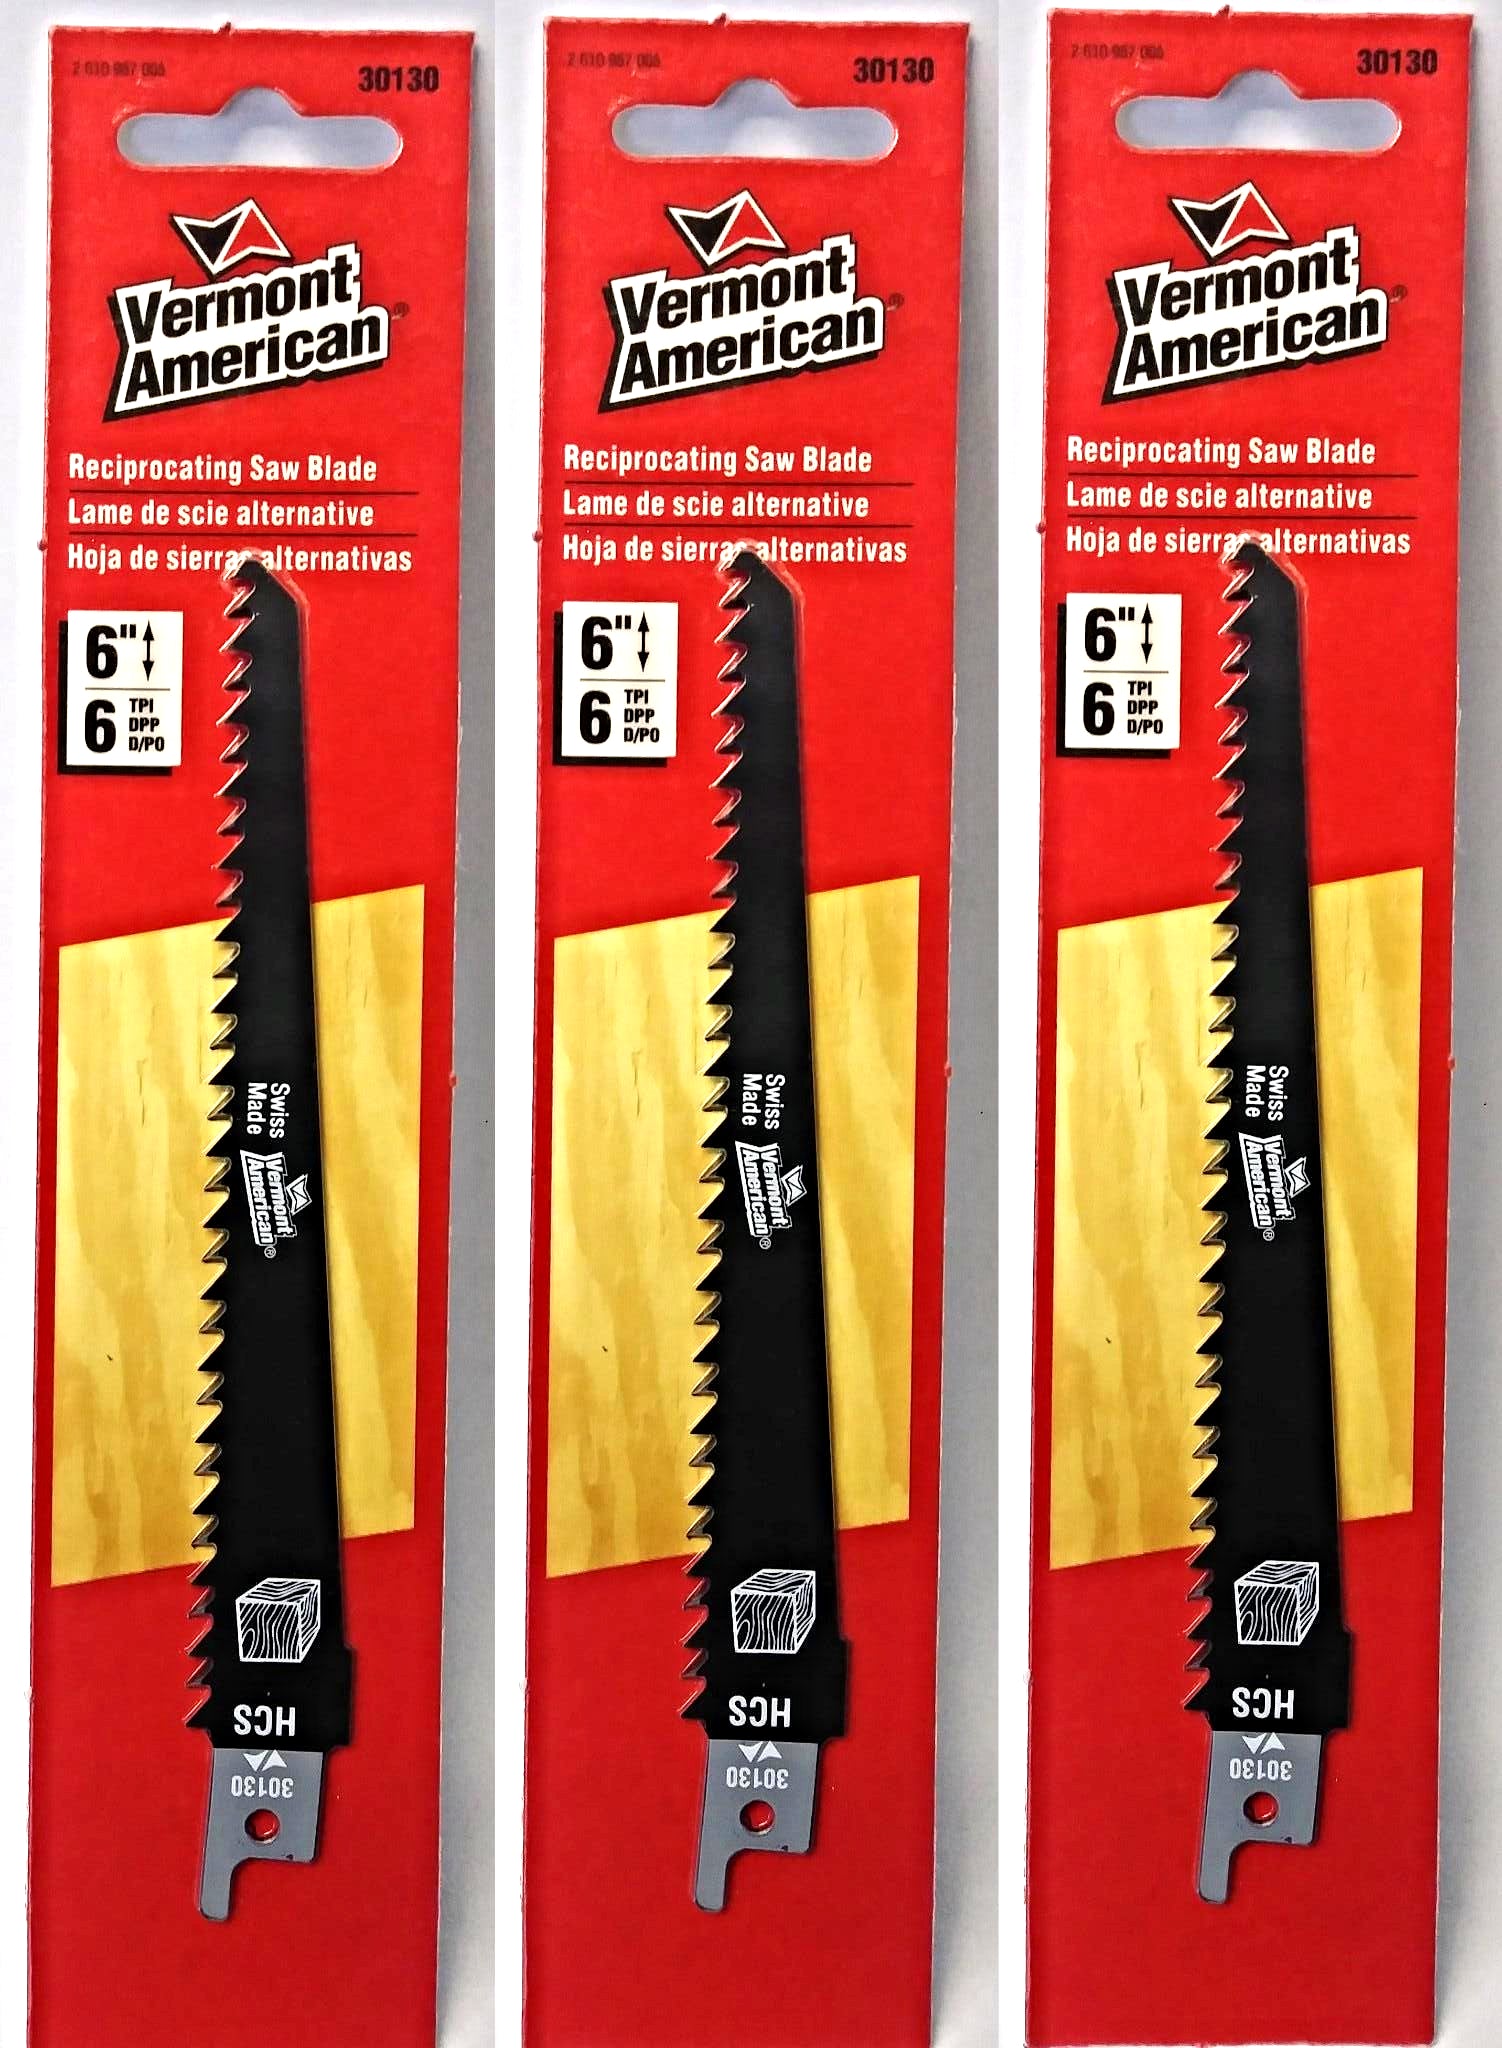 Vermont American 30130 6" x 6 TPI HCS Reciprocating Saw Blade (3 Packs)